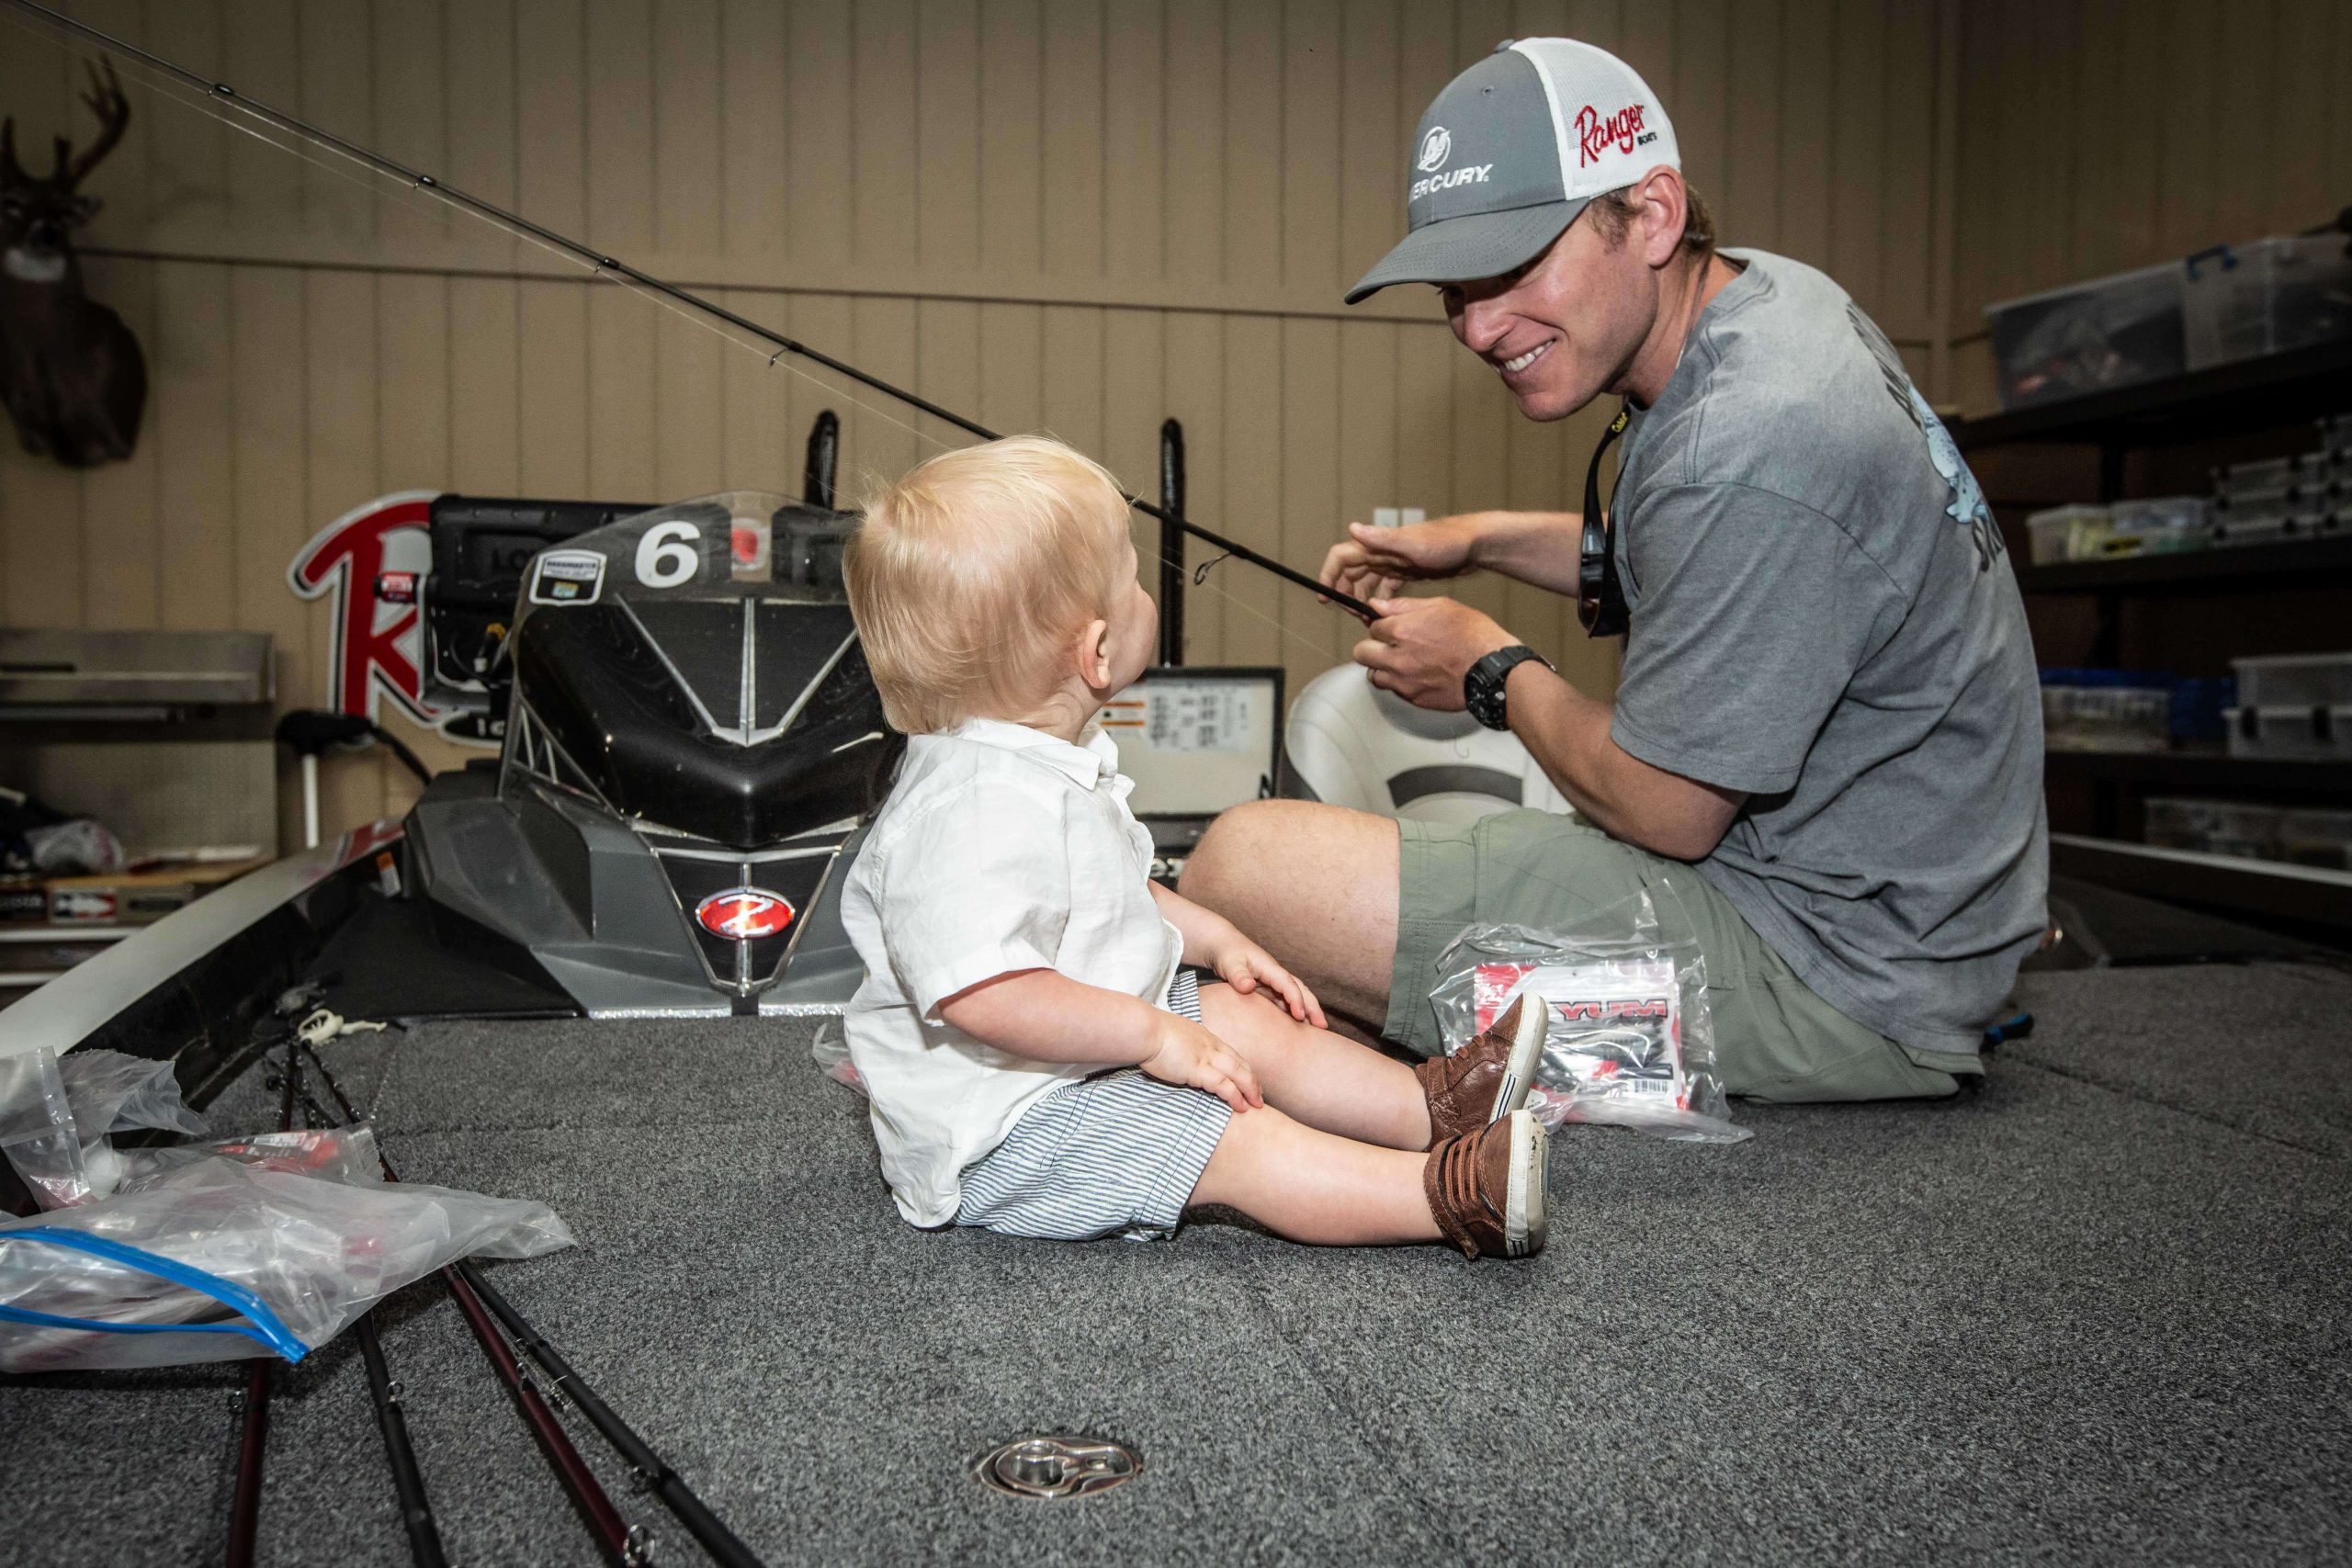 Frazier is committed to getting his young son into fishing the right way, but it all starts with mild introduction to all the components. It's more about the time together than anything.  